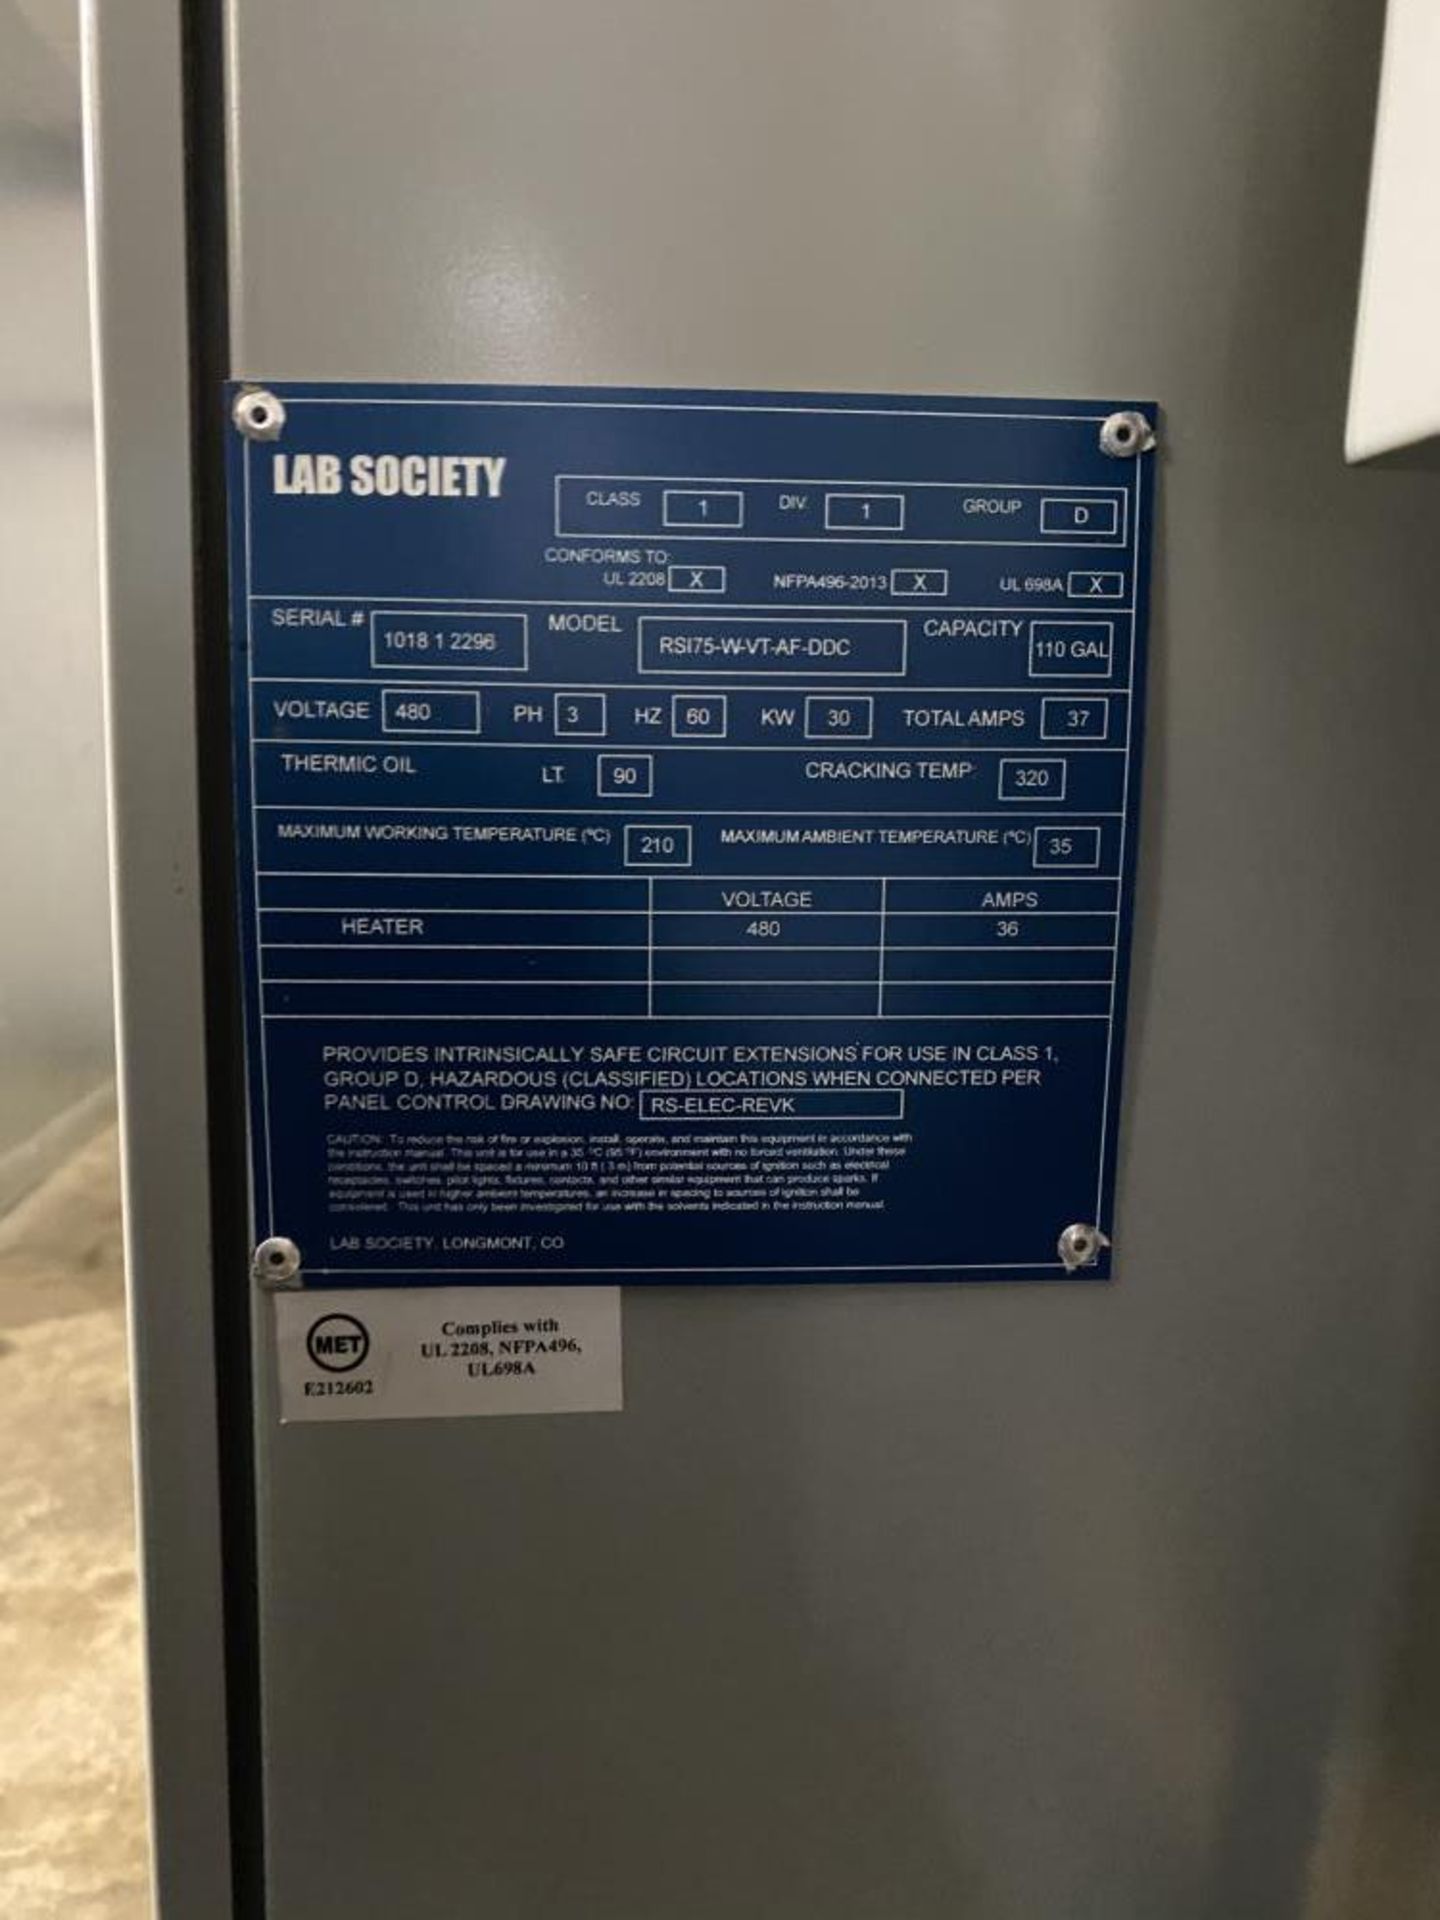 Used Lab Society Automated Solvent Recovery System (ASRS) 110 Gal - Image 6 of 6